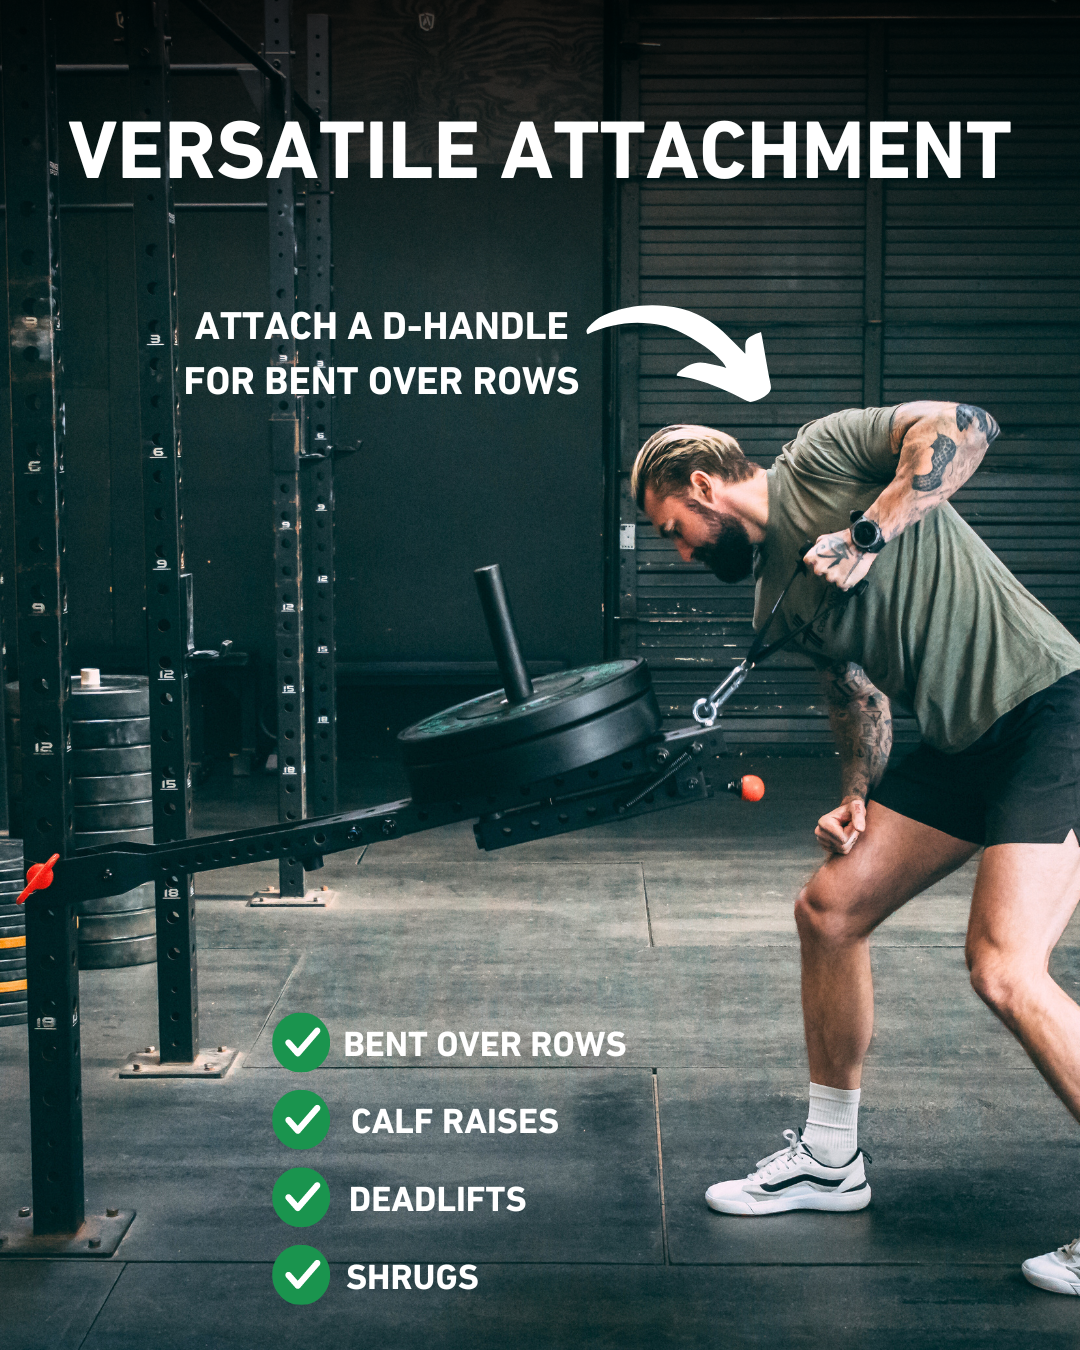 Attach a D-handle for bent over rows.